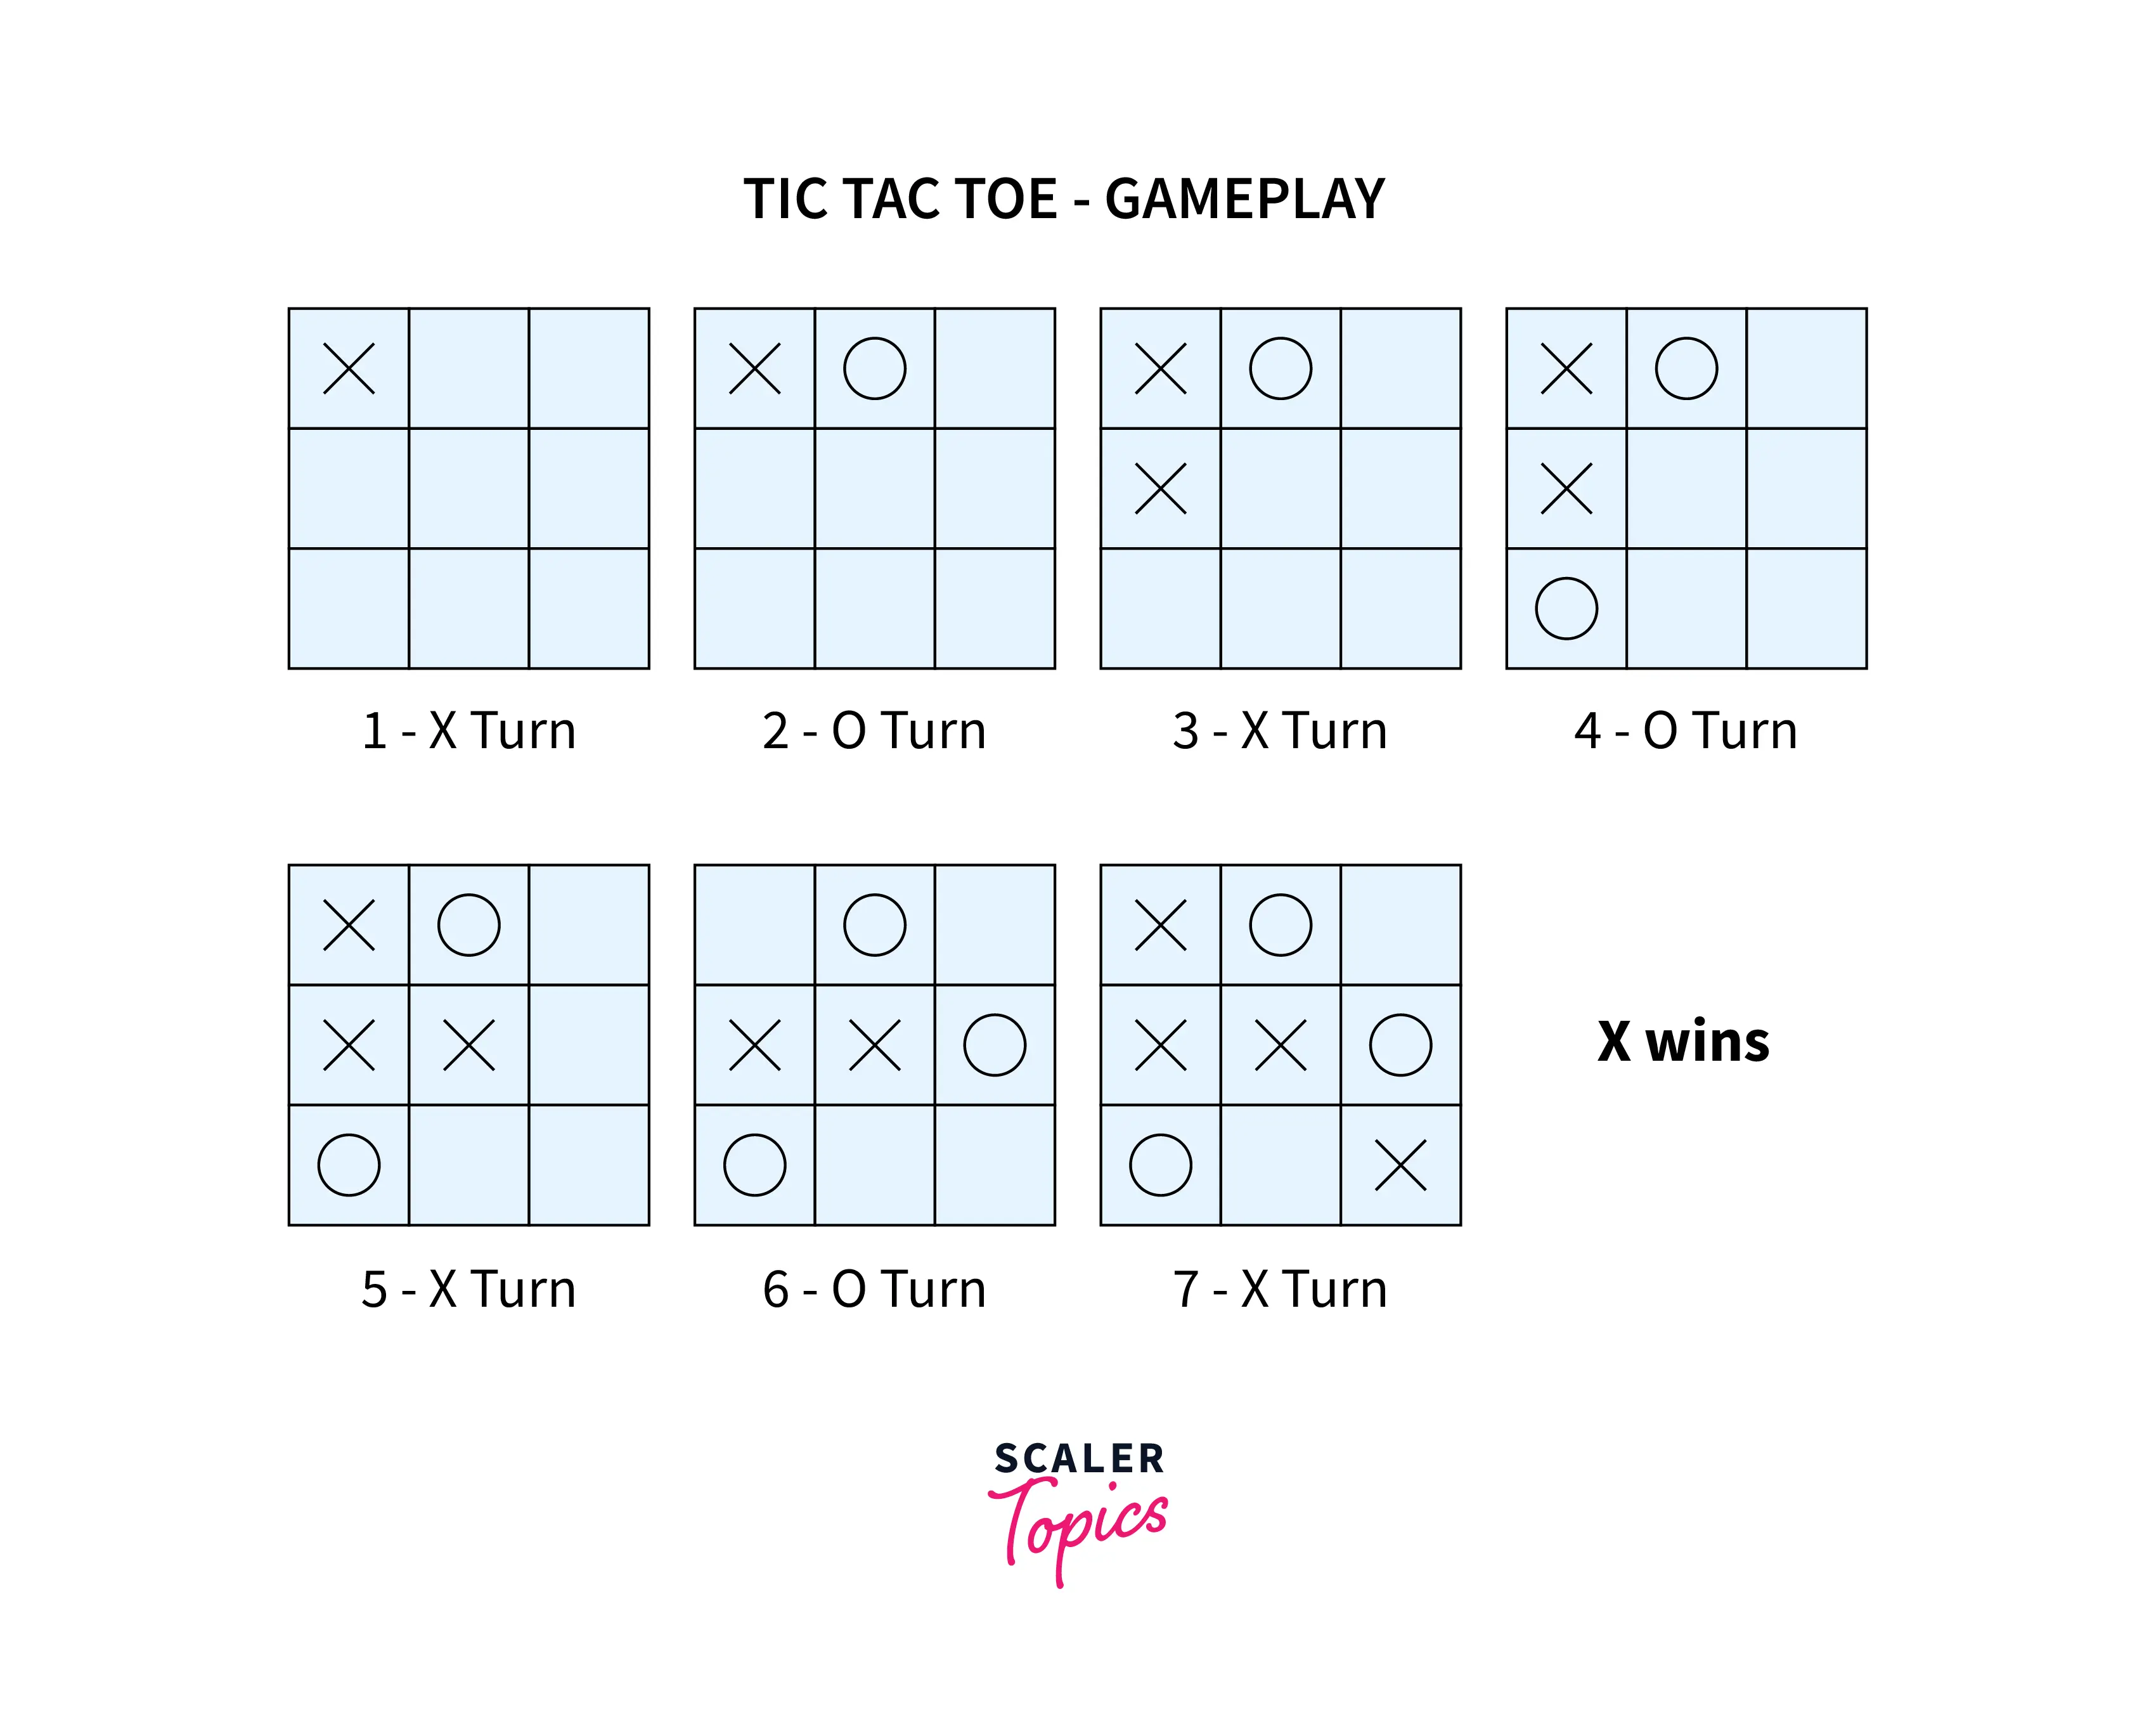 Tic-Tac-Toe Game using Python: Building a Graphical Interface